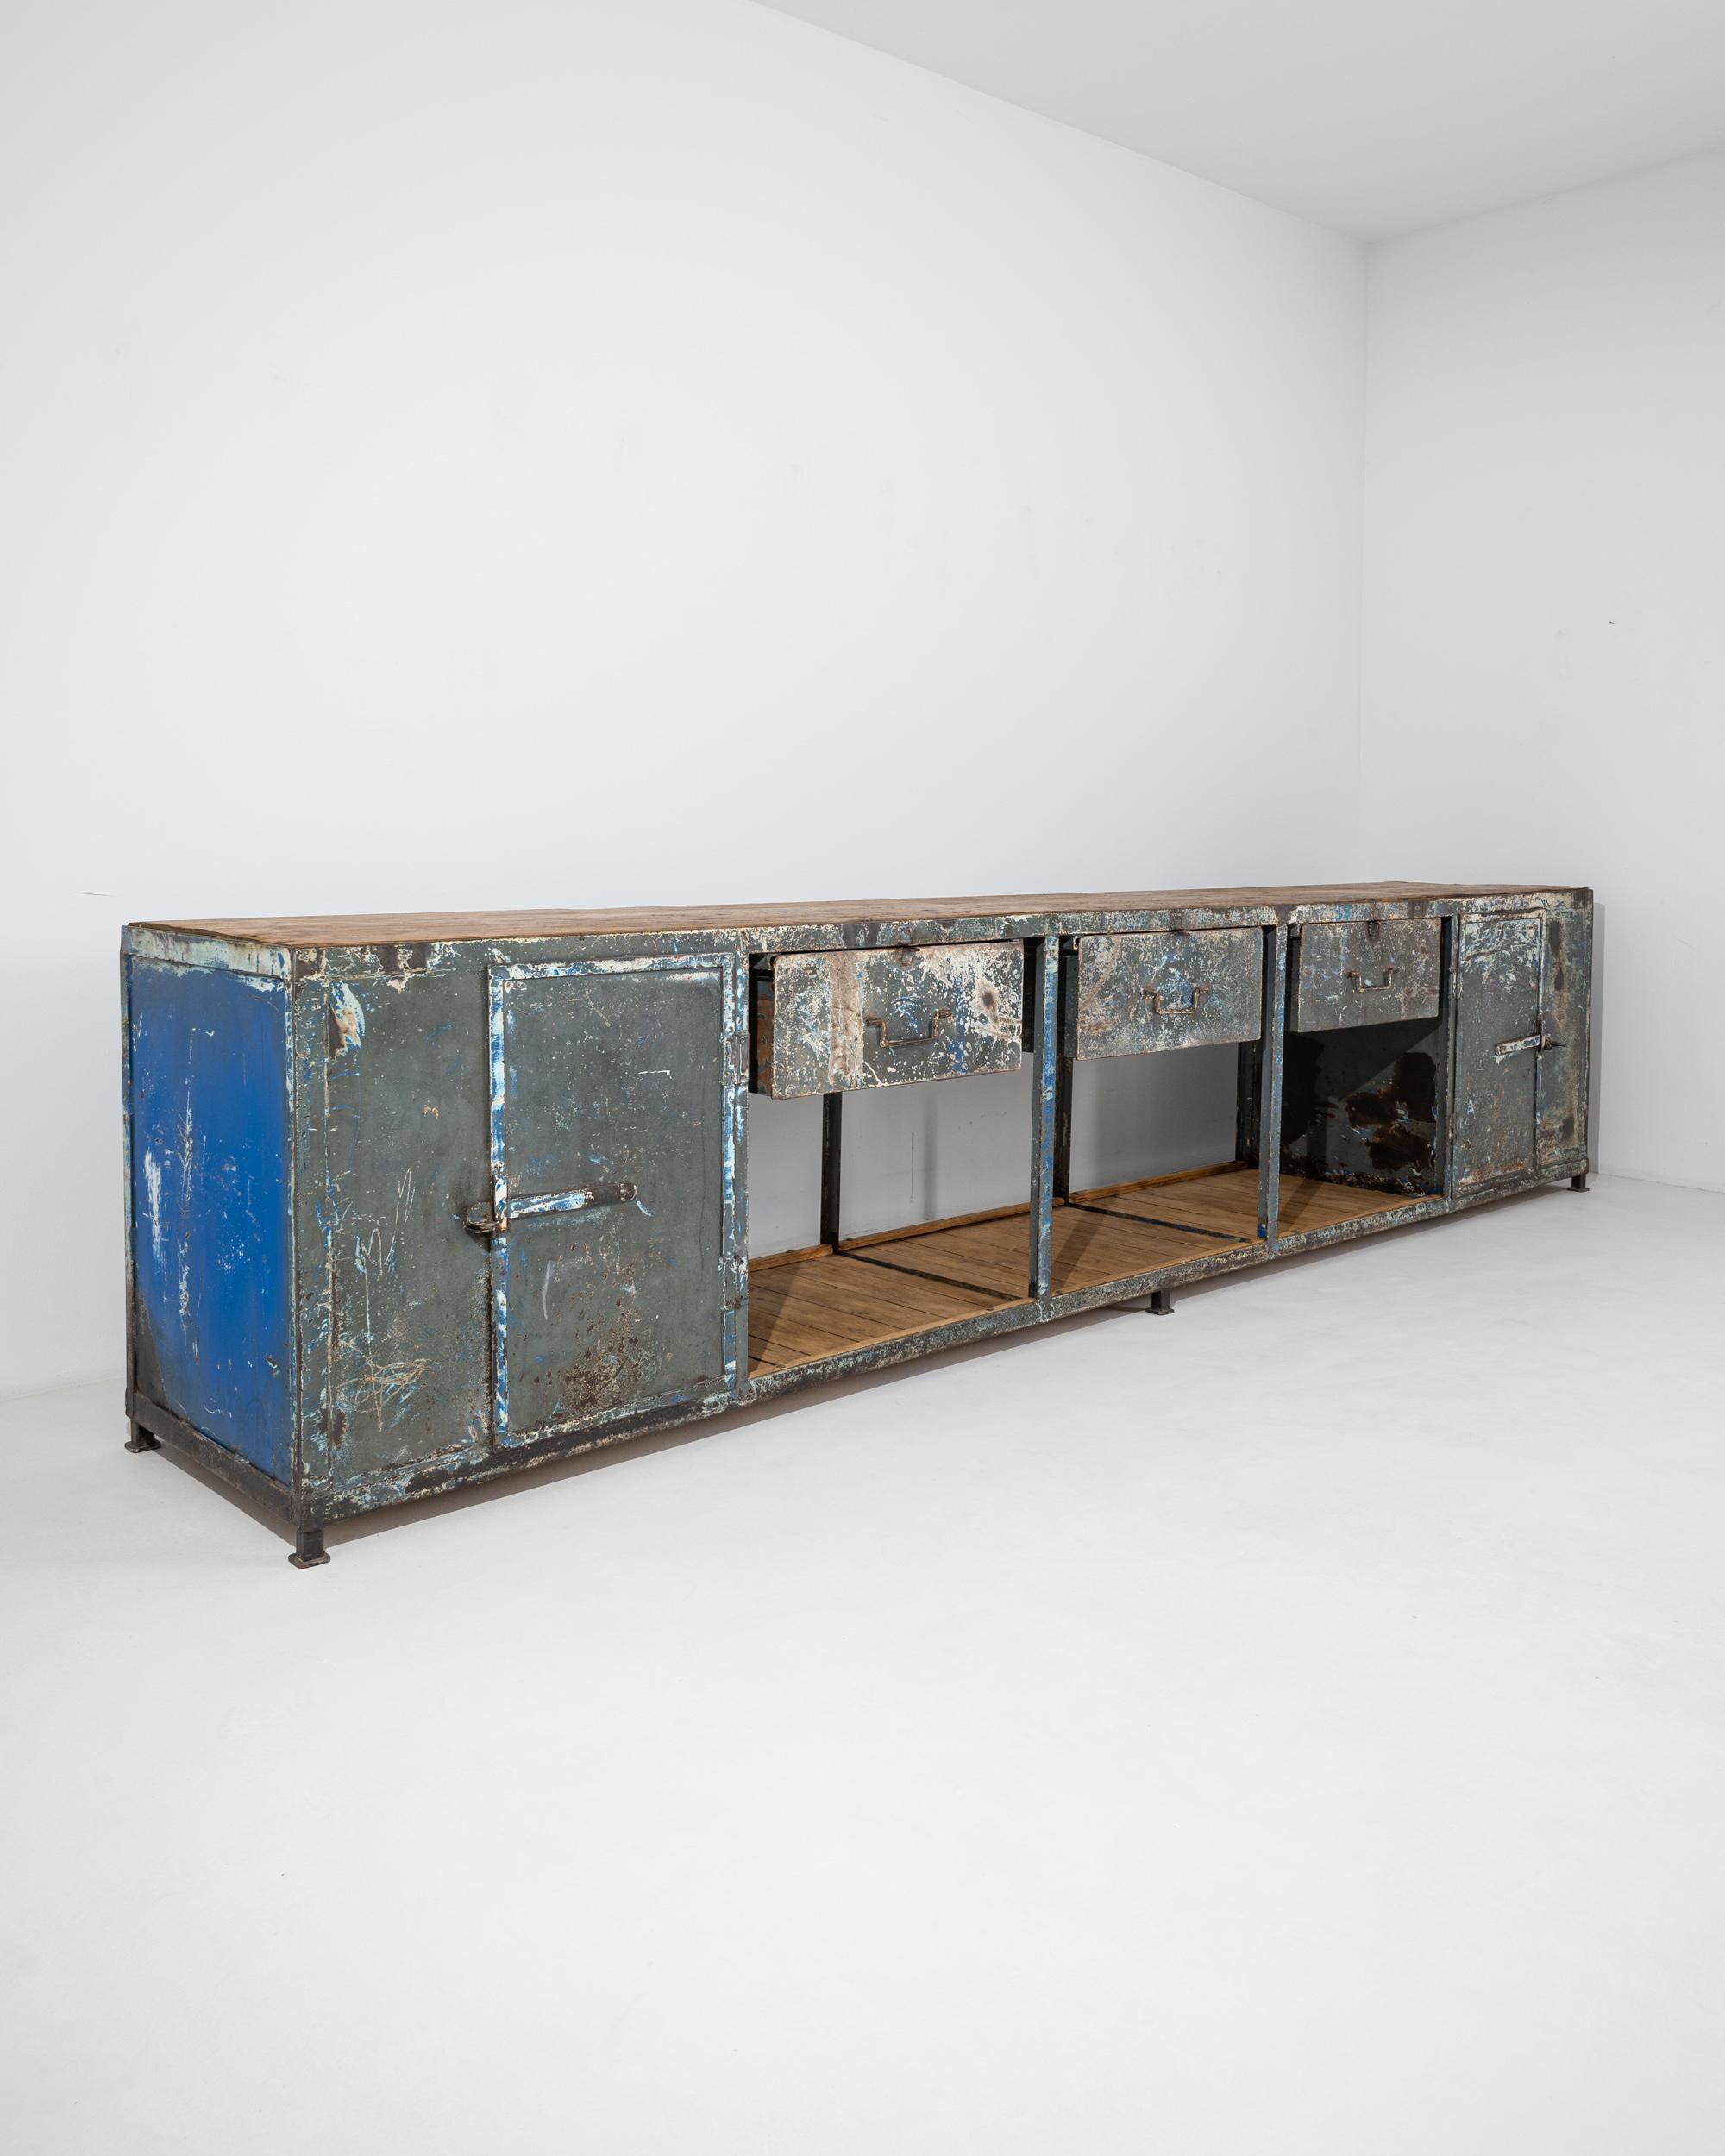 The distressed surface of this vintage metal work table gives it a distinctive post-industrial aesthetic. Made in Central Europe in the 20th century, the pragmatic design indicates that this piece would have once been used in a workshop or factory.